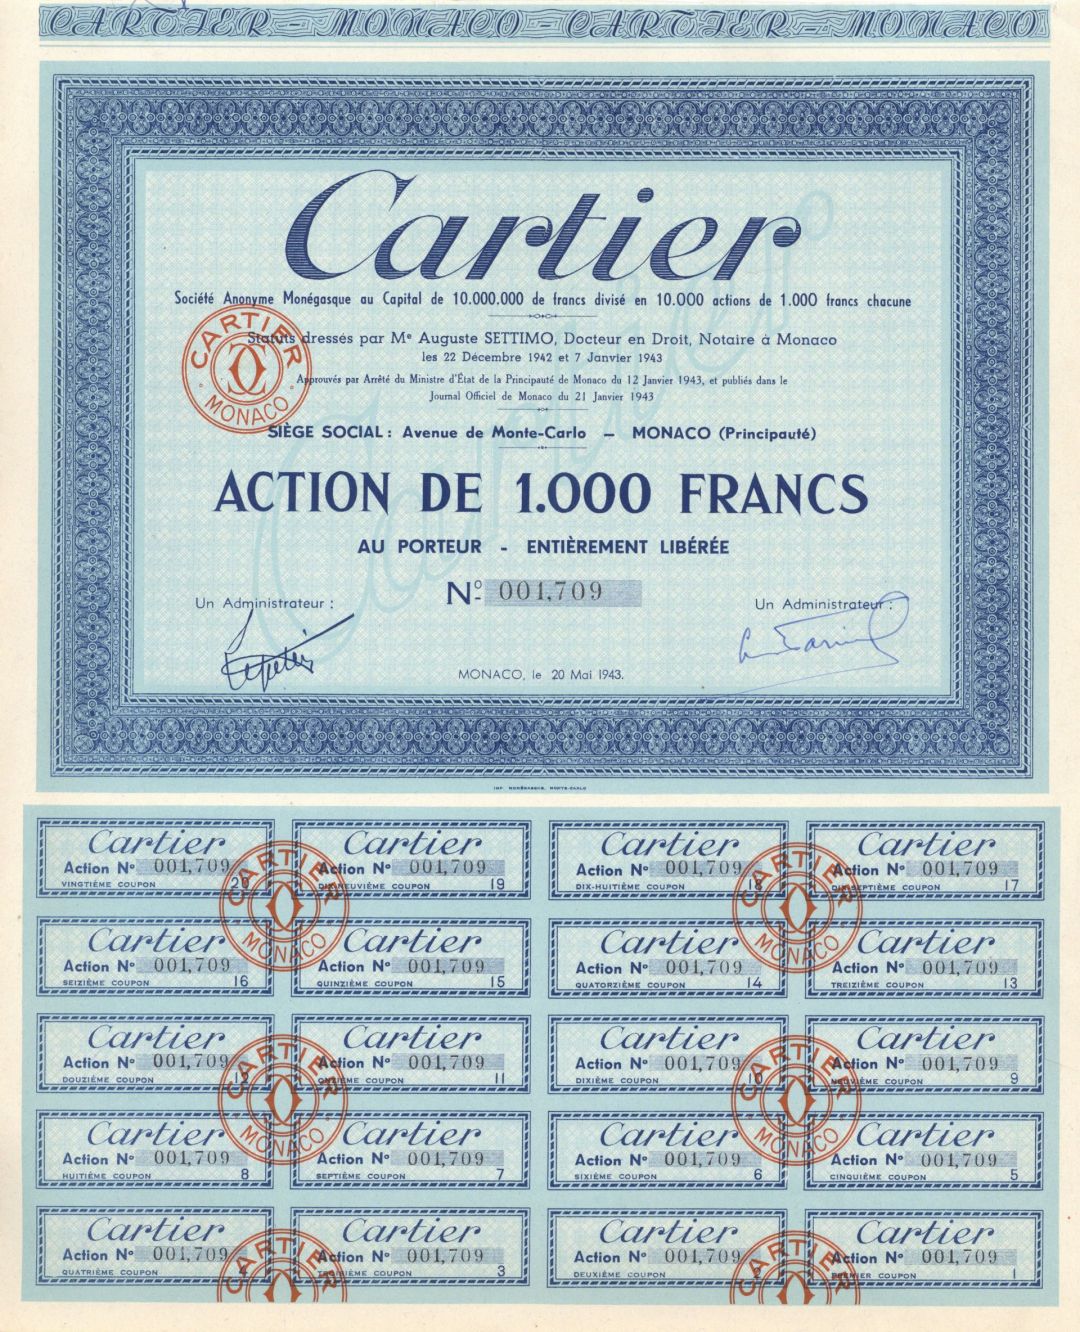 Cartier - 1943 dated Jewelers Stock Certificate - Extremely Rare - Same Lettering as on Their Store Fronts